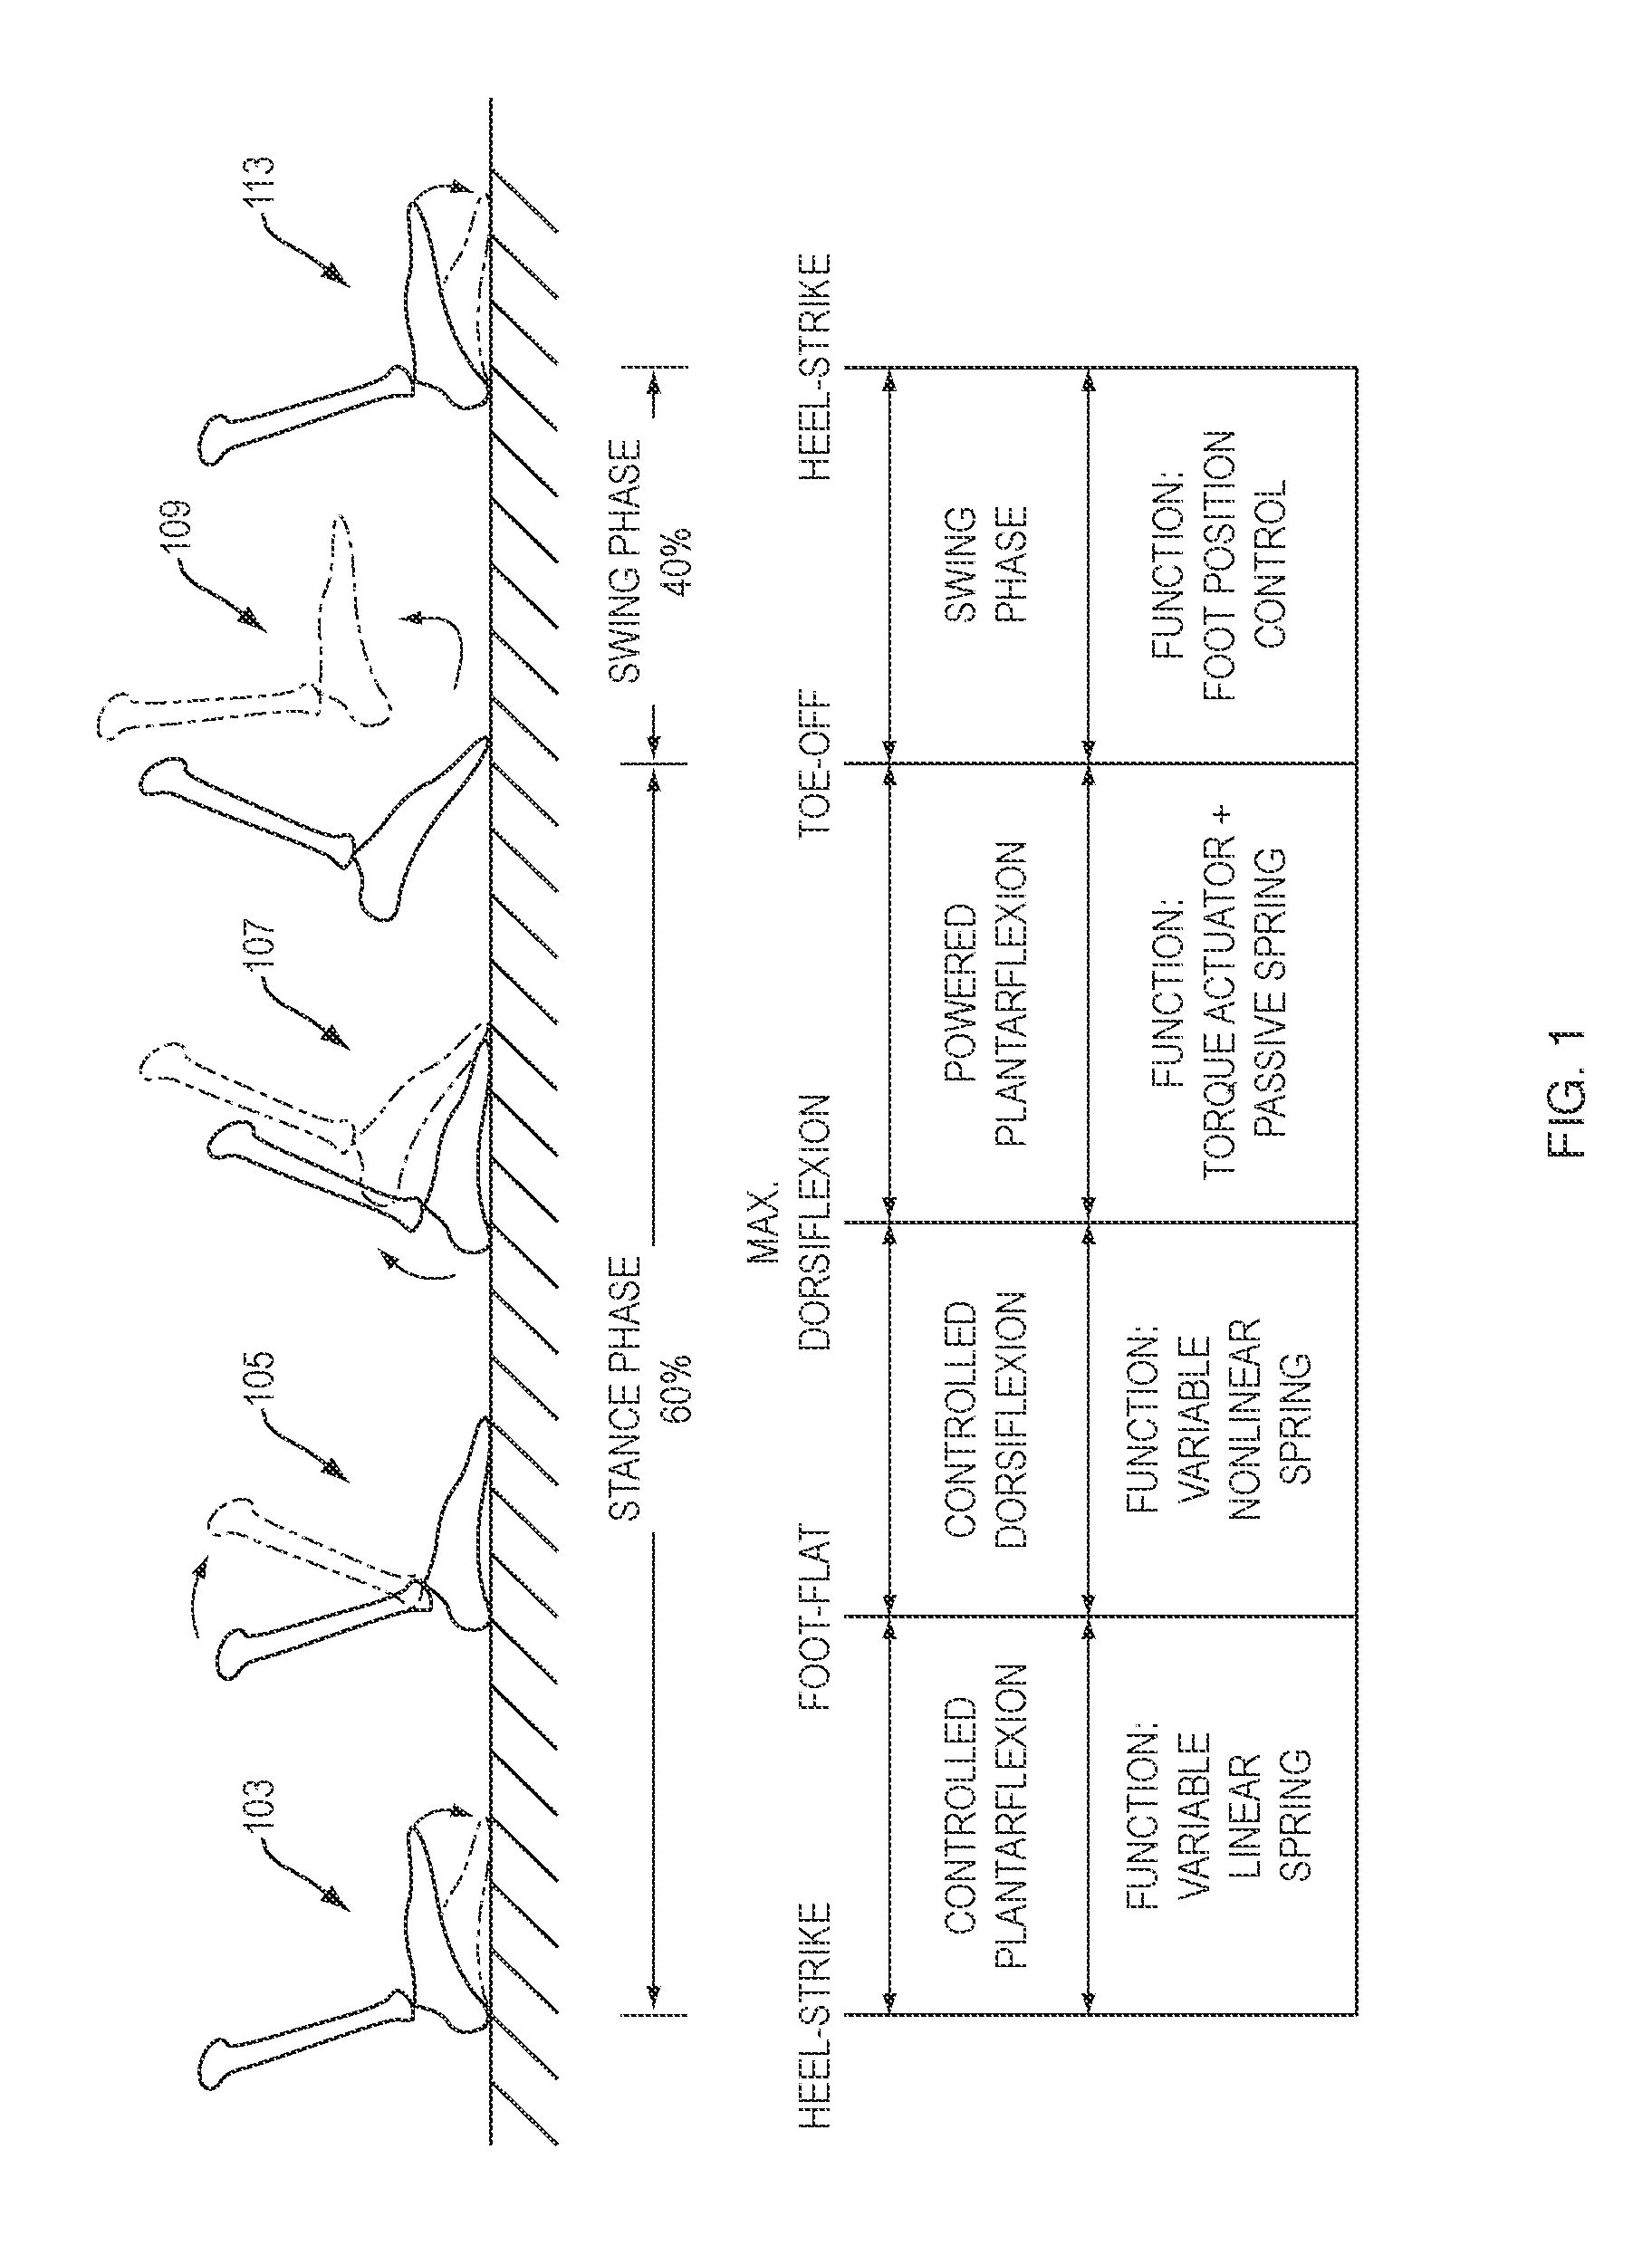 Artificial Human Limbs and Joints Employing Actuators, Springs, and Variable-Damper Elements